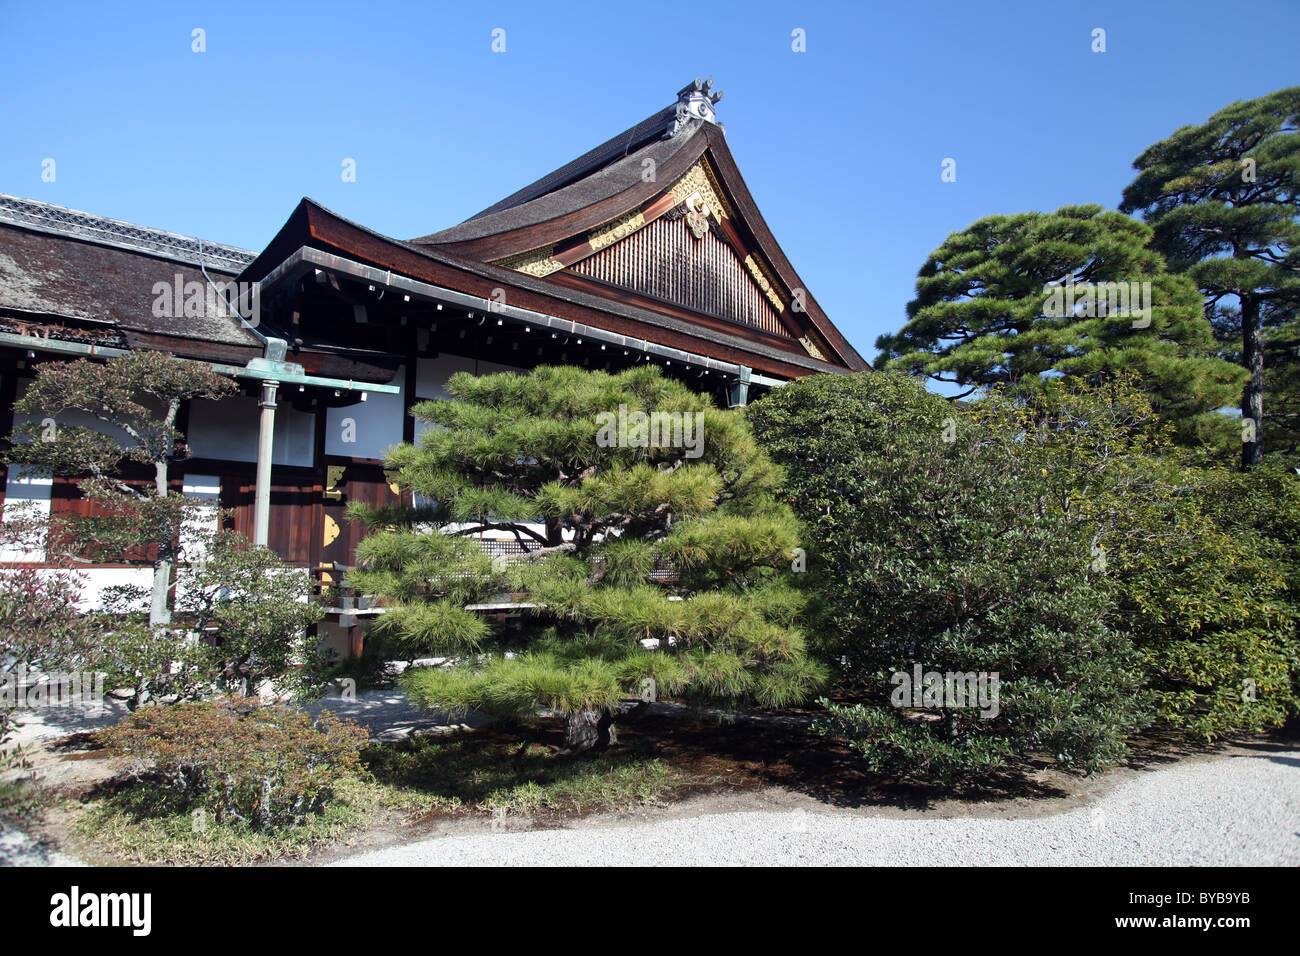 Bulding of Imperial Palace hidden by trees, Kyoto, Japan. Stock Photo